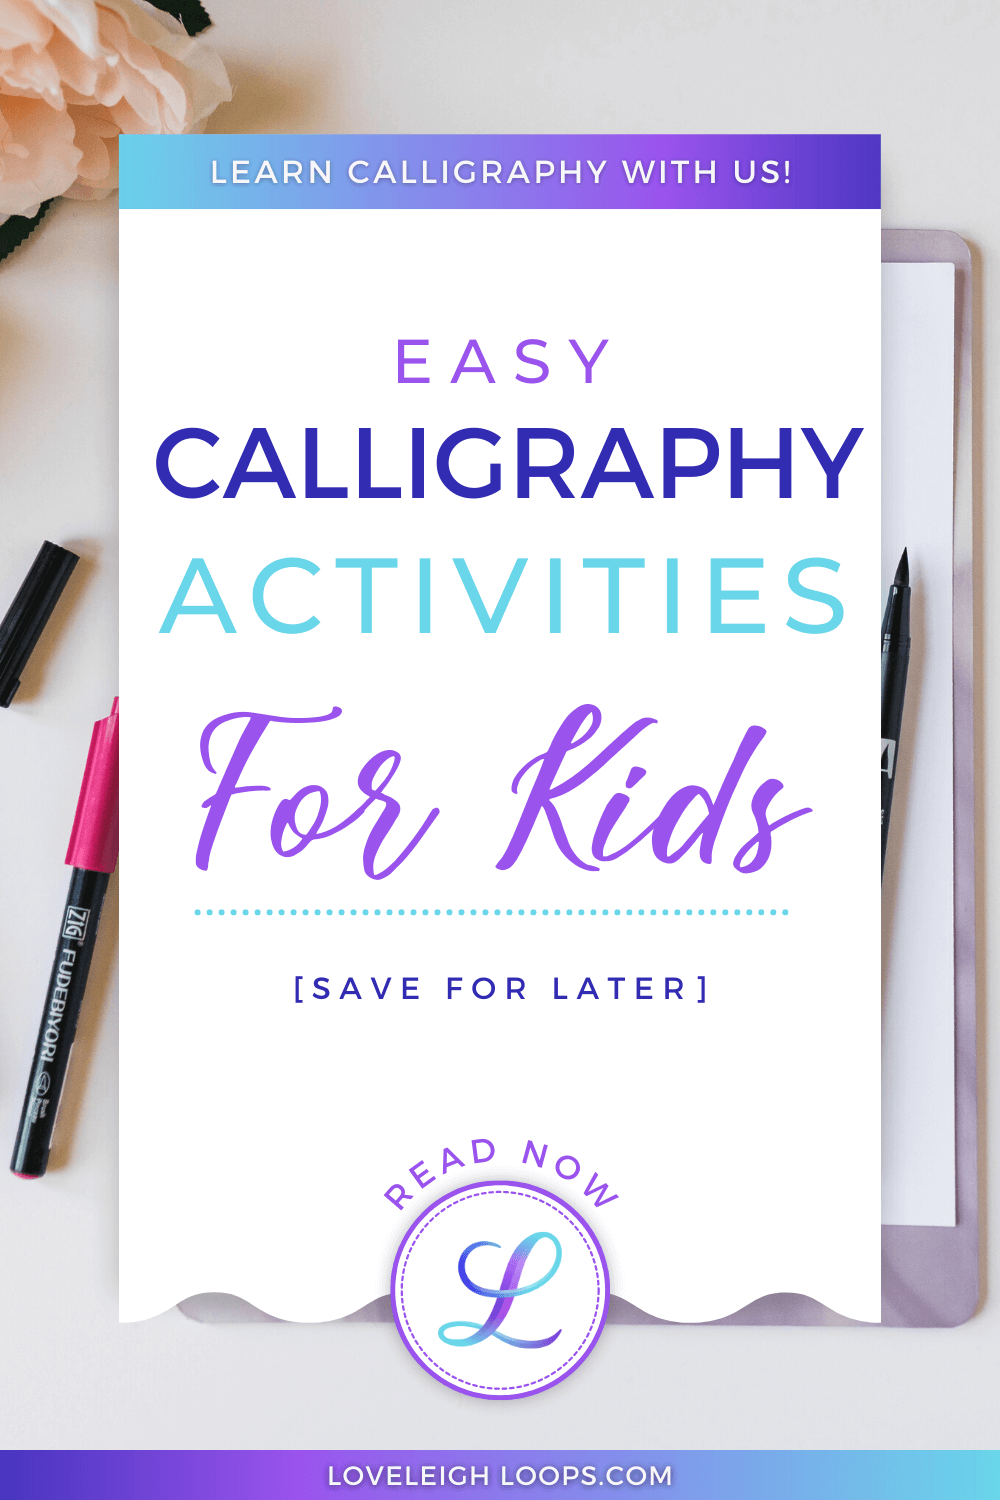 Calligraphy For Kids: 3 Free Ideas To Try — Loveleigh Loops